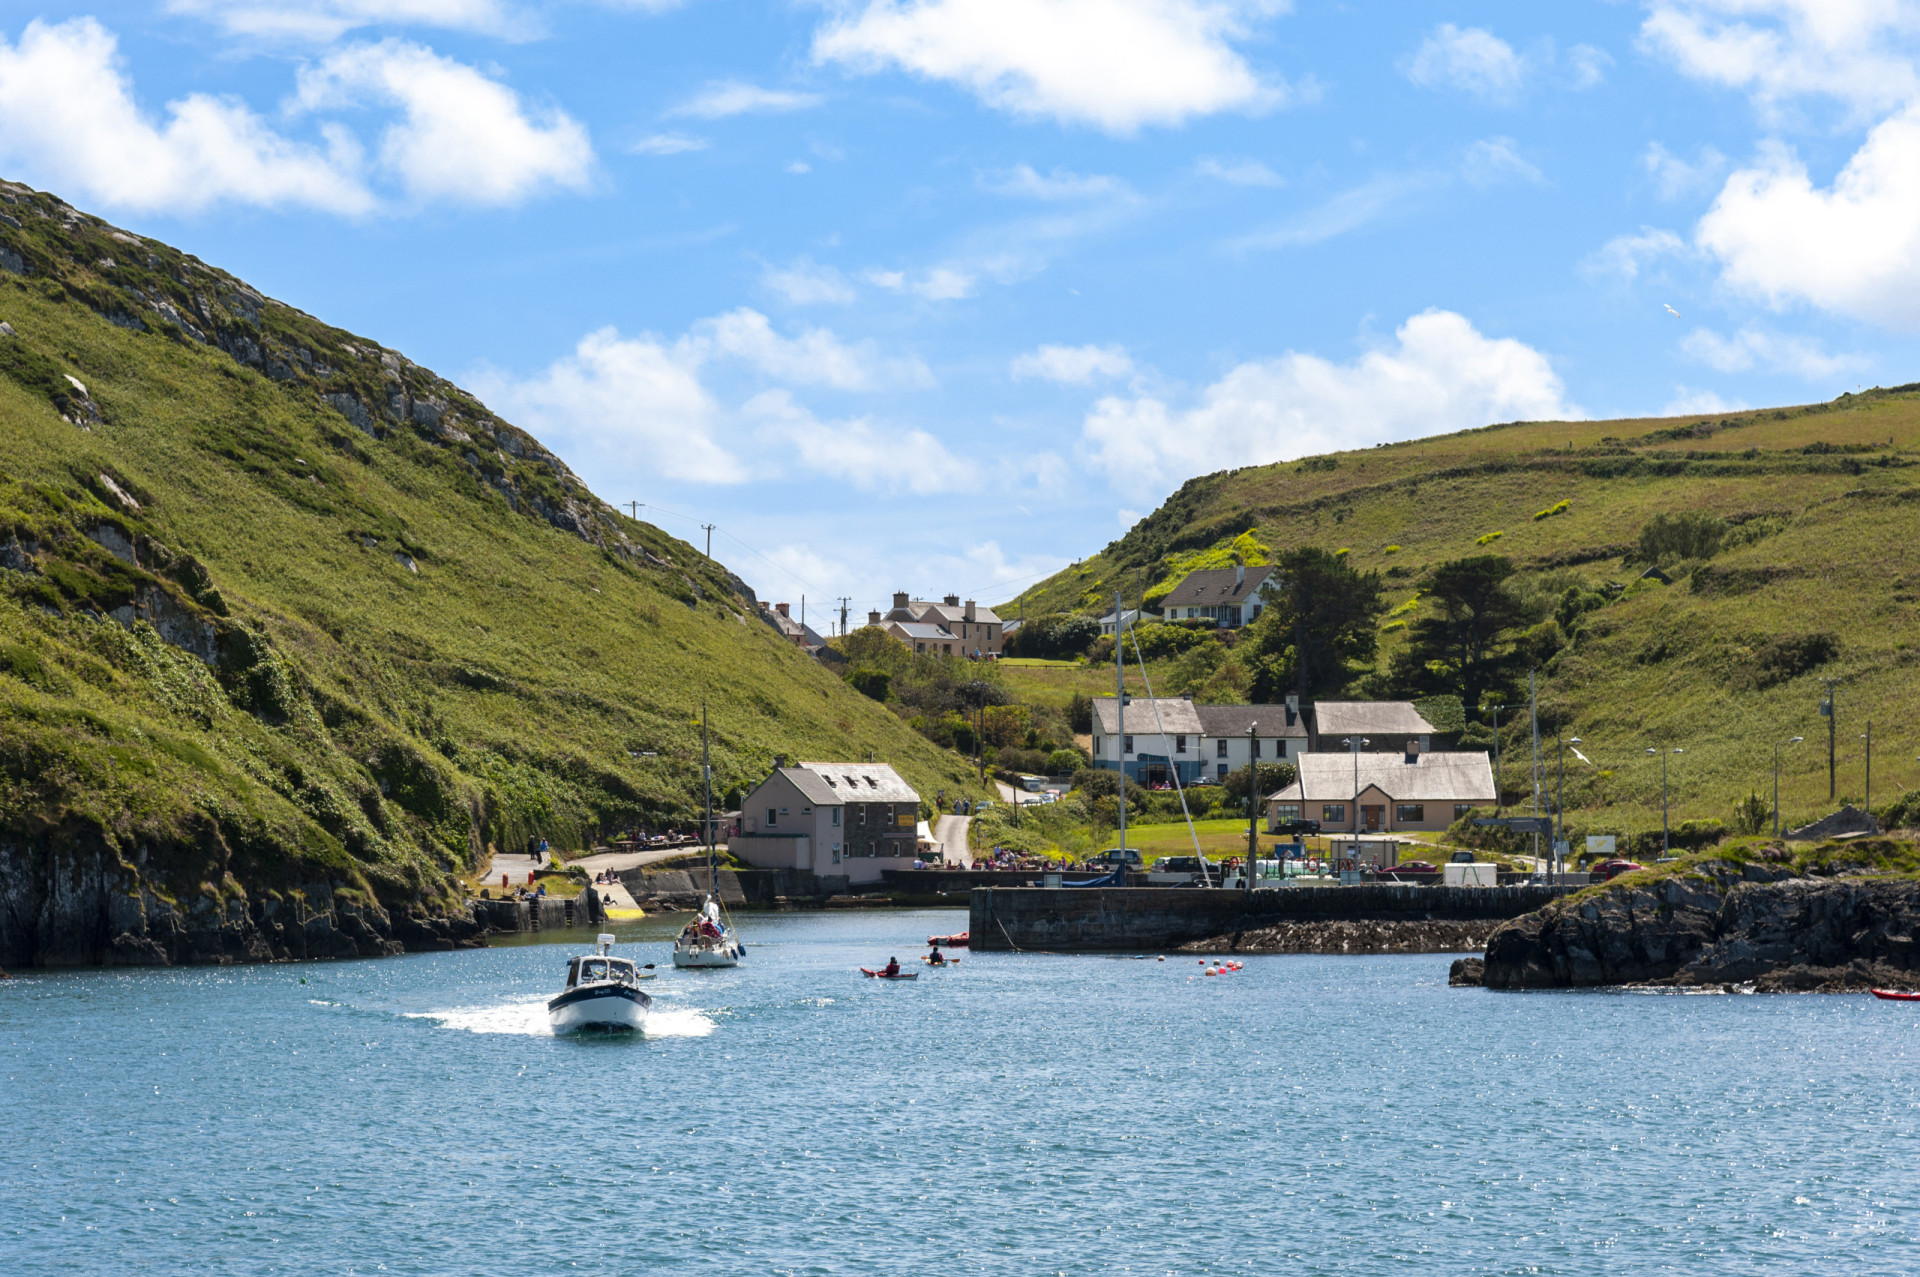 <p>This Irish-speaking island lies just 1 nautical mile (2 km) to the east of neighboring Sherkin Island. The south harbor welcomes many yachts and pleasure boats to this picturesque refuge.</p><p>You may also like:<a href="https://www.starsinsider.com/n/252211?utm_source=msn.com&utm_medium=display&utm_campaign=referral_description&utm_content=621106en-au"> Who has the most vandalized star on the Hollywood Walk of Fame?</a></p>